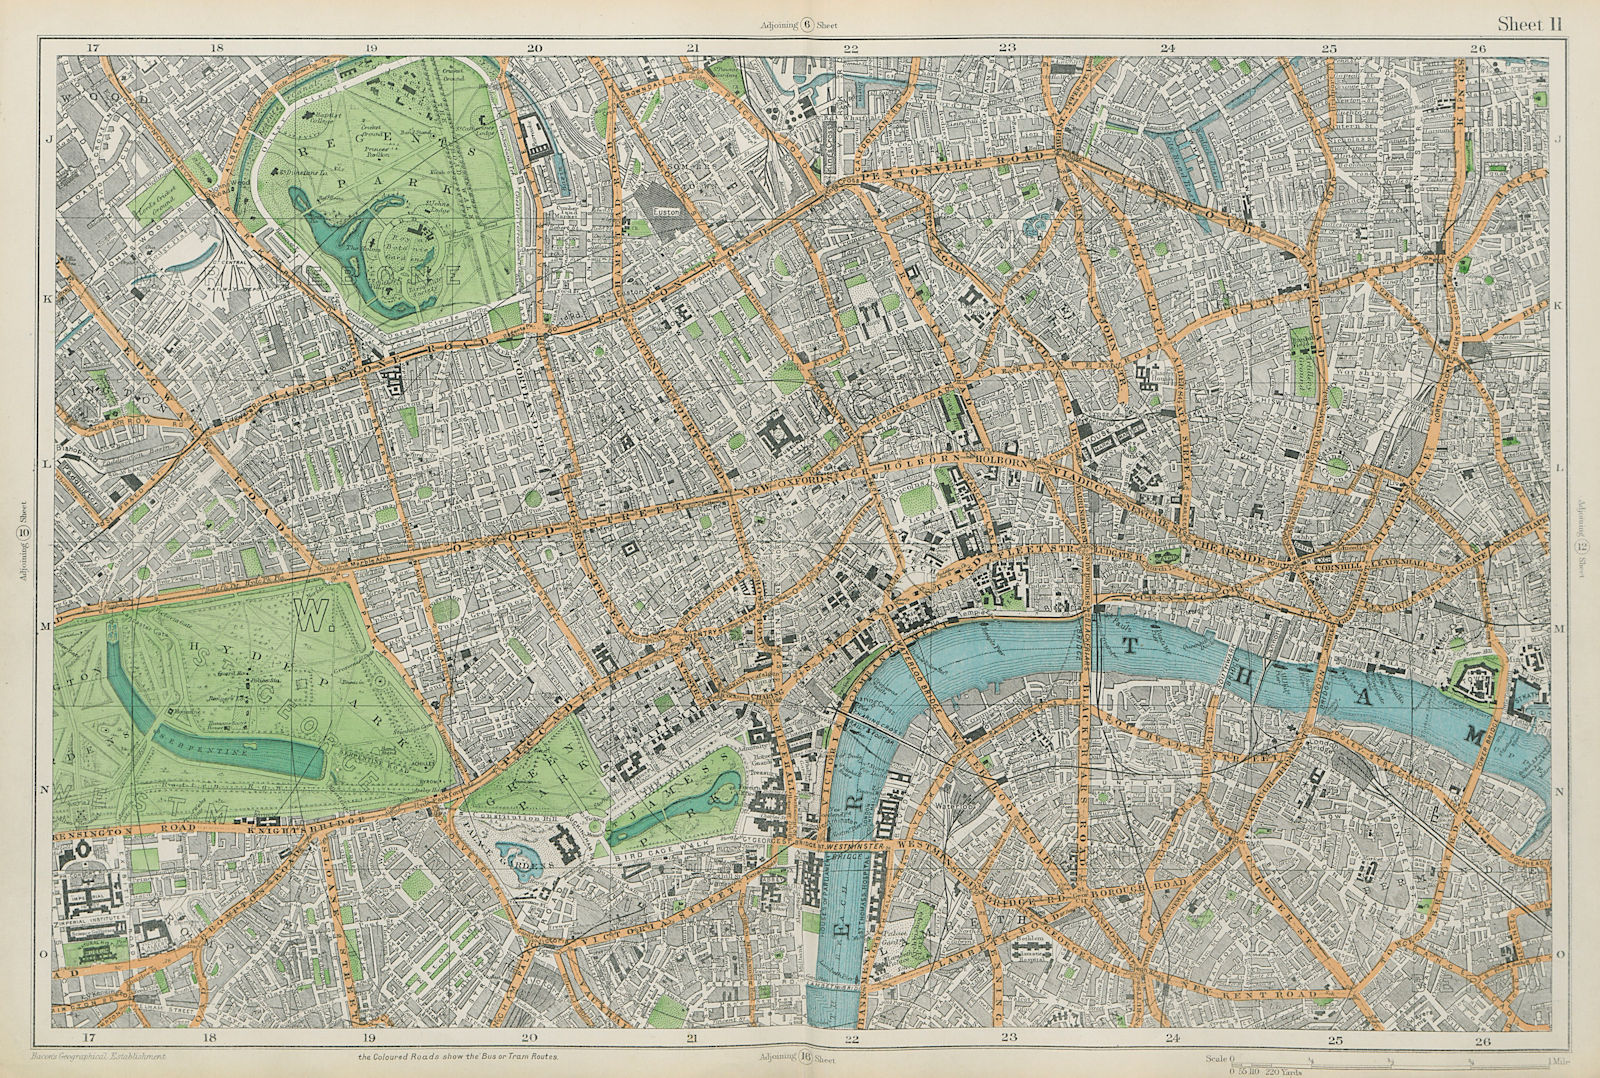 Associate Product CENTRAL LONDON West End City Southwark Westminster Shoreditch. BACON  1913 map